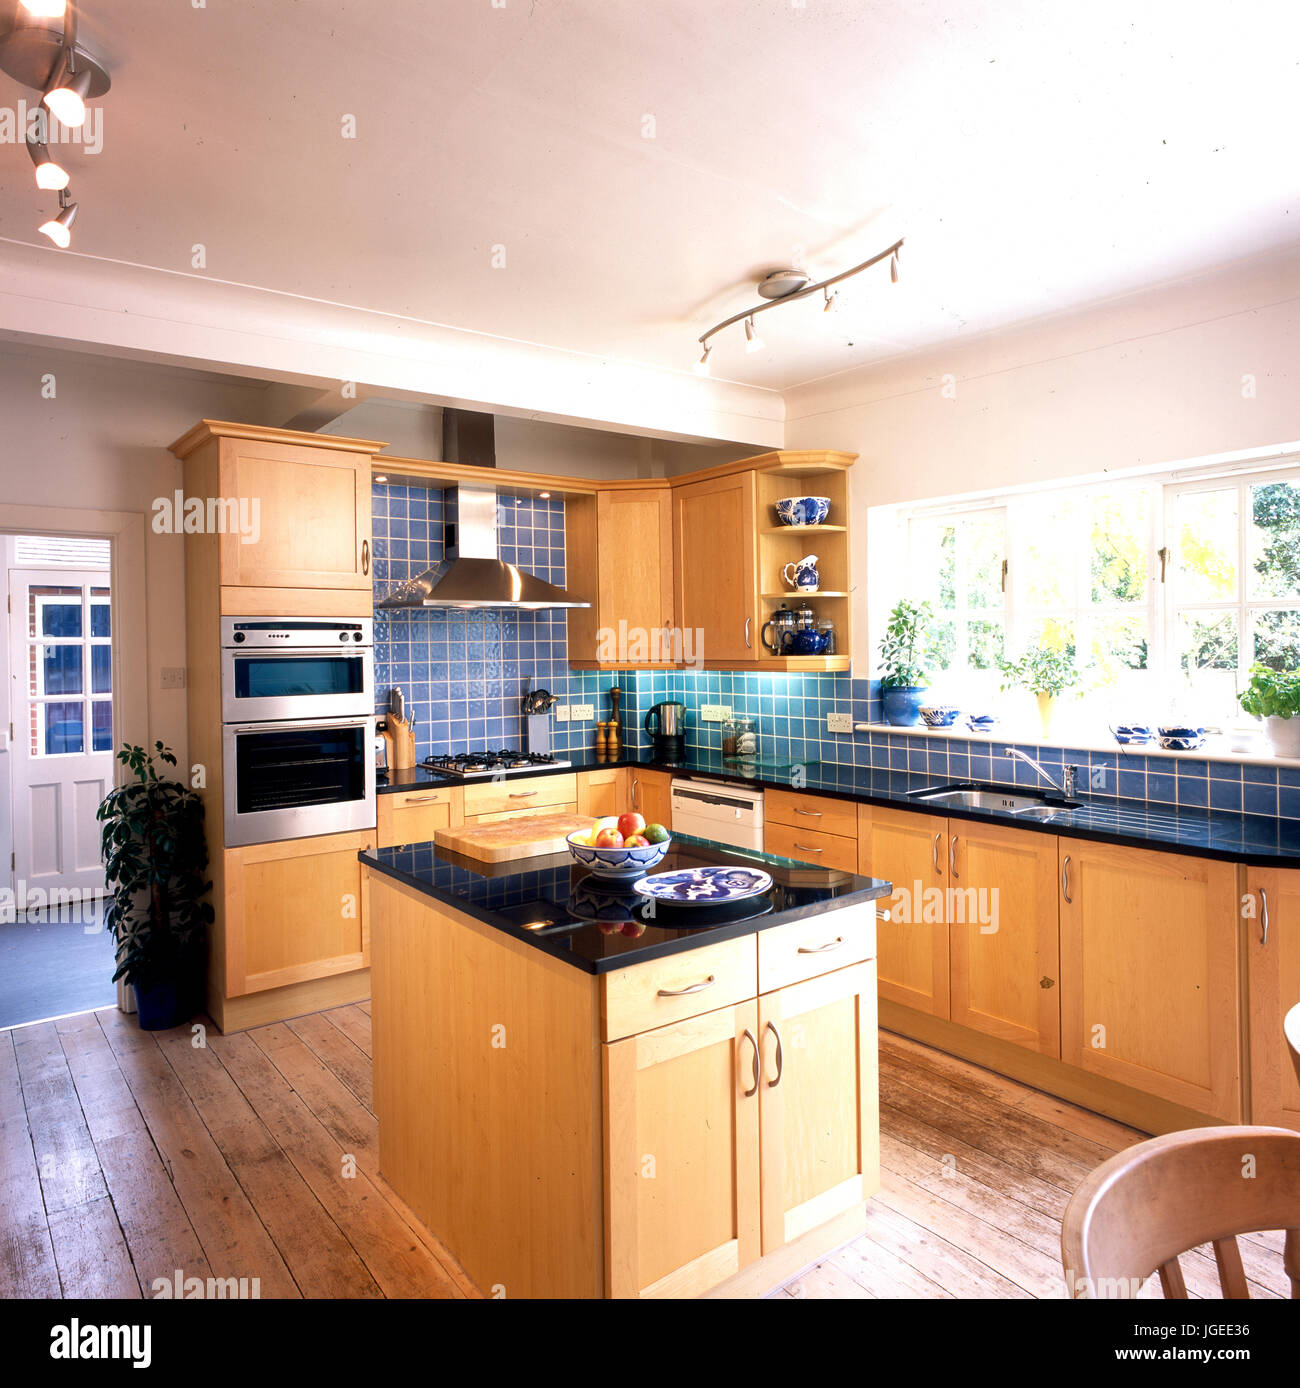 Island unit in kitchen with blue tiles and wooden fitted units Stock Photo